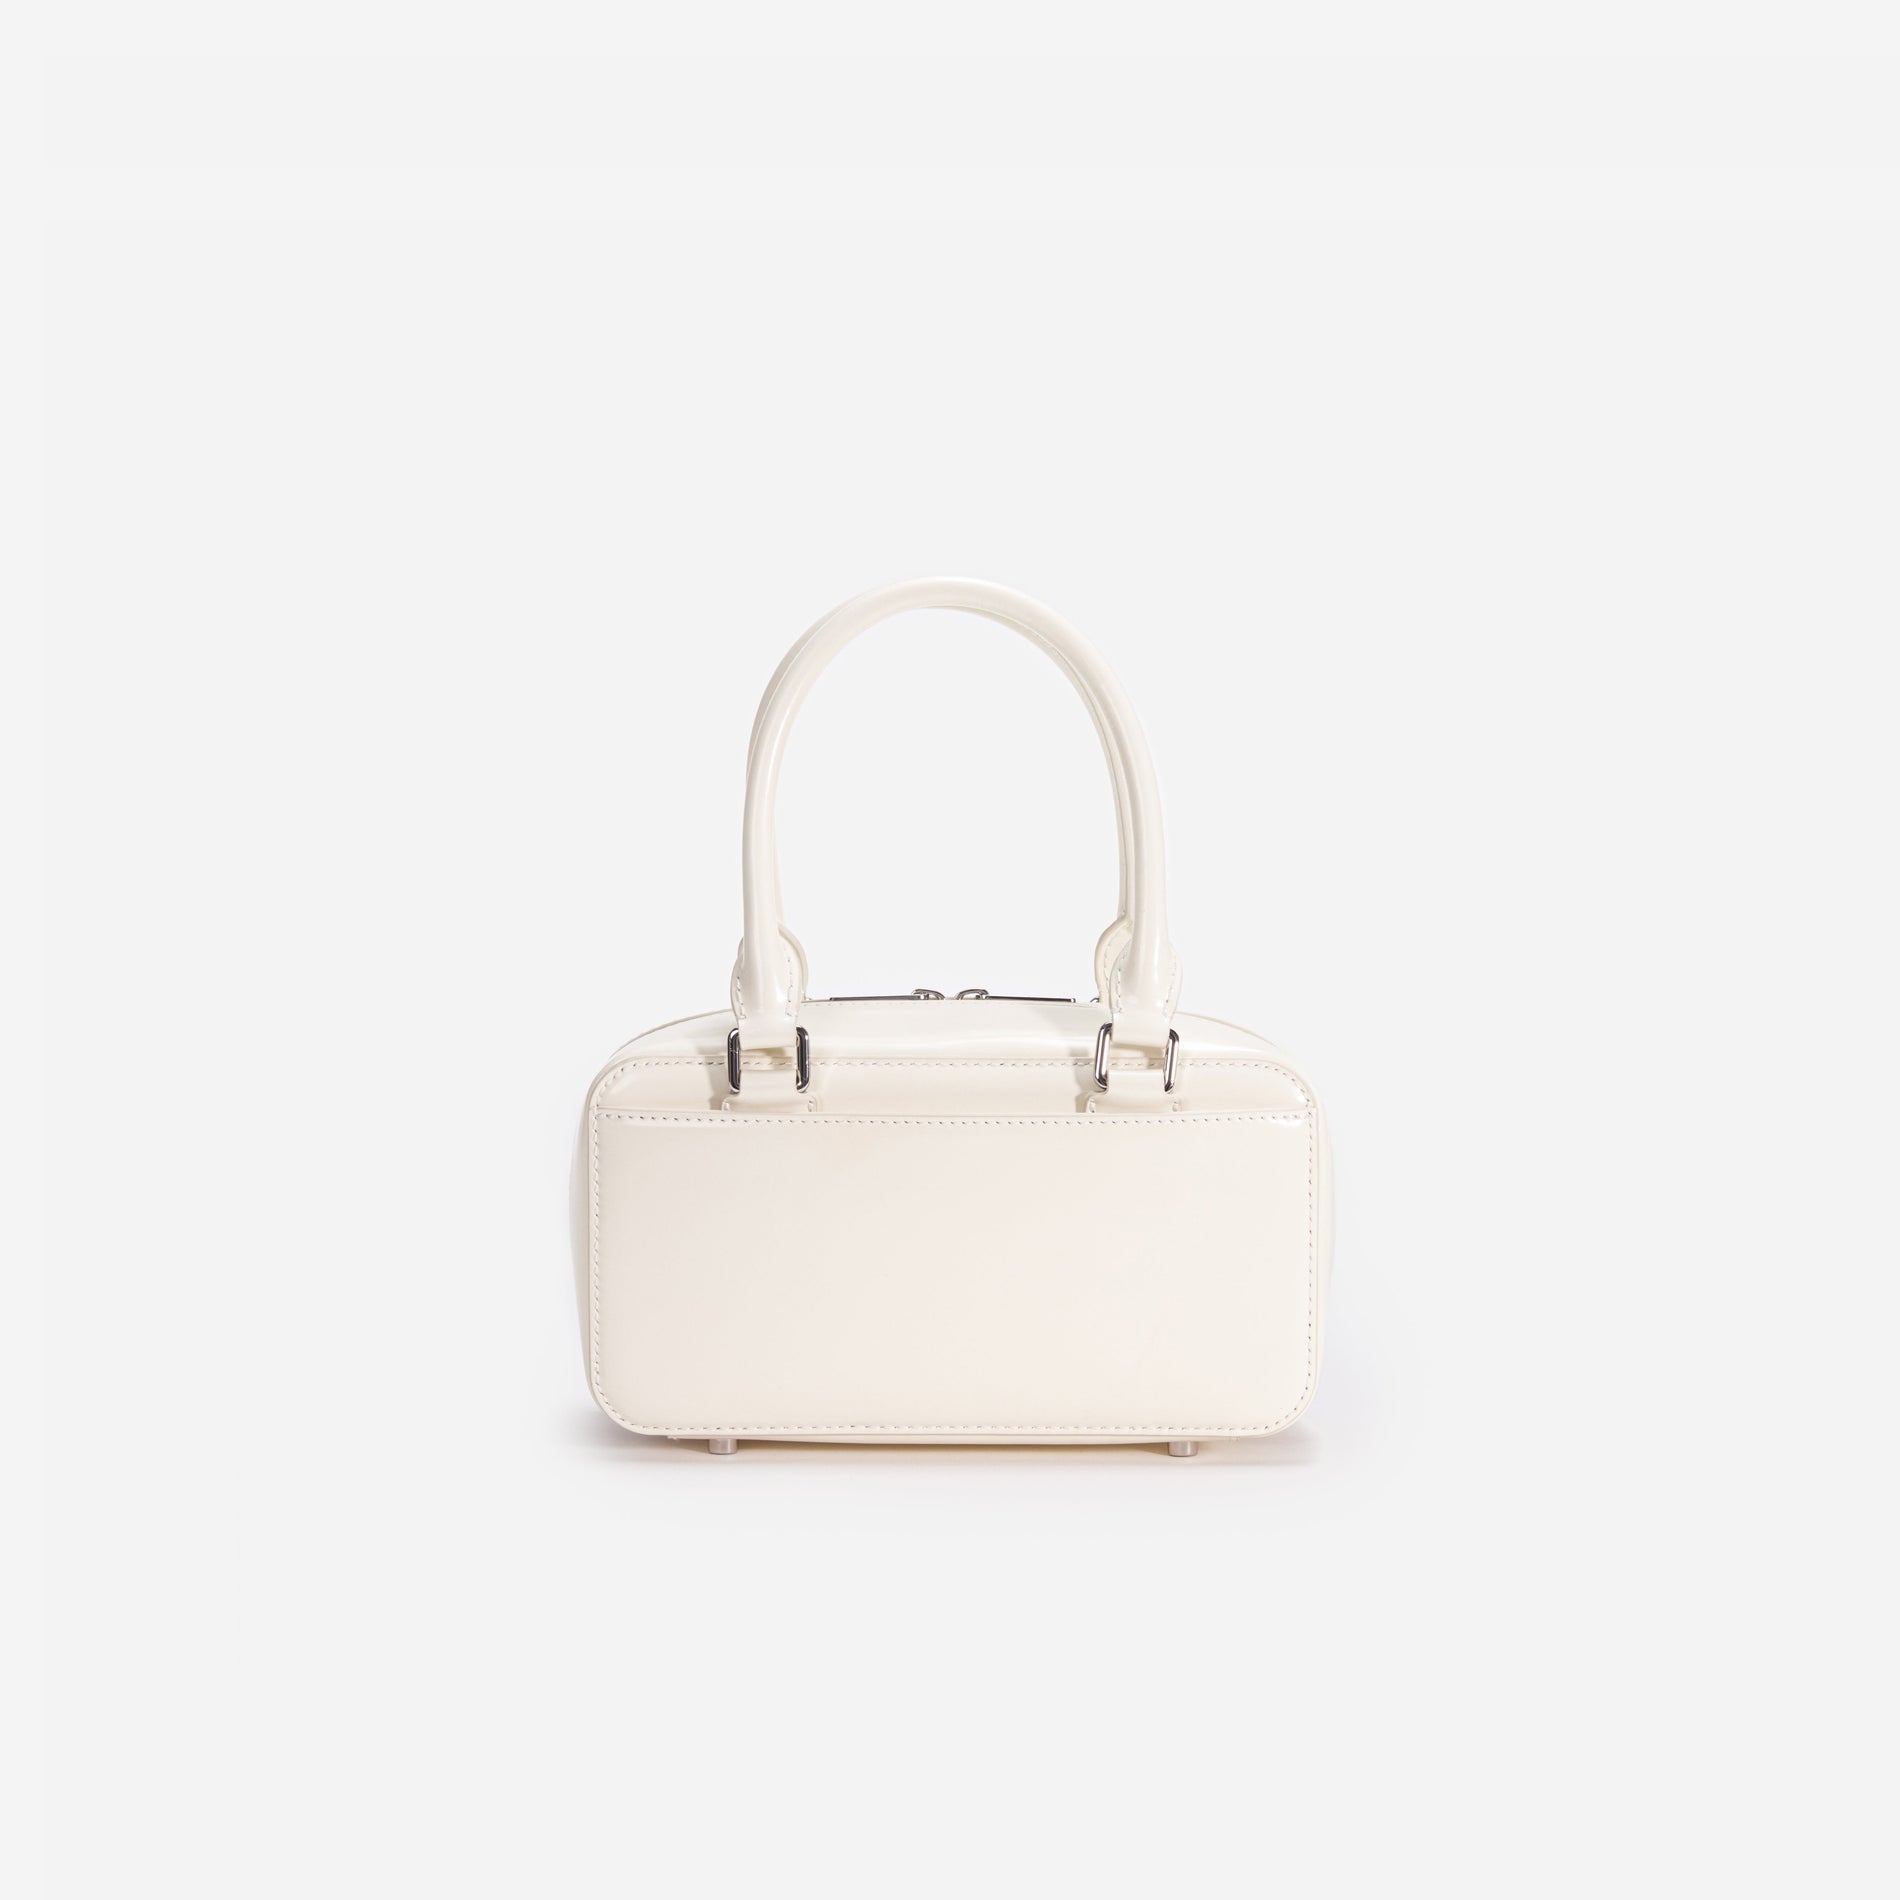 Back view of a woman wearing the White Cream Leather Mini Tote Bag